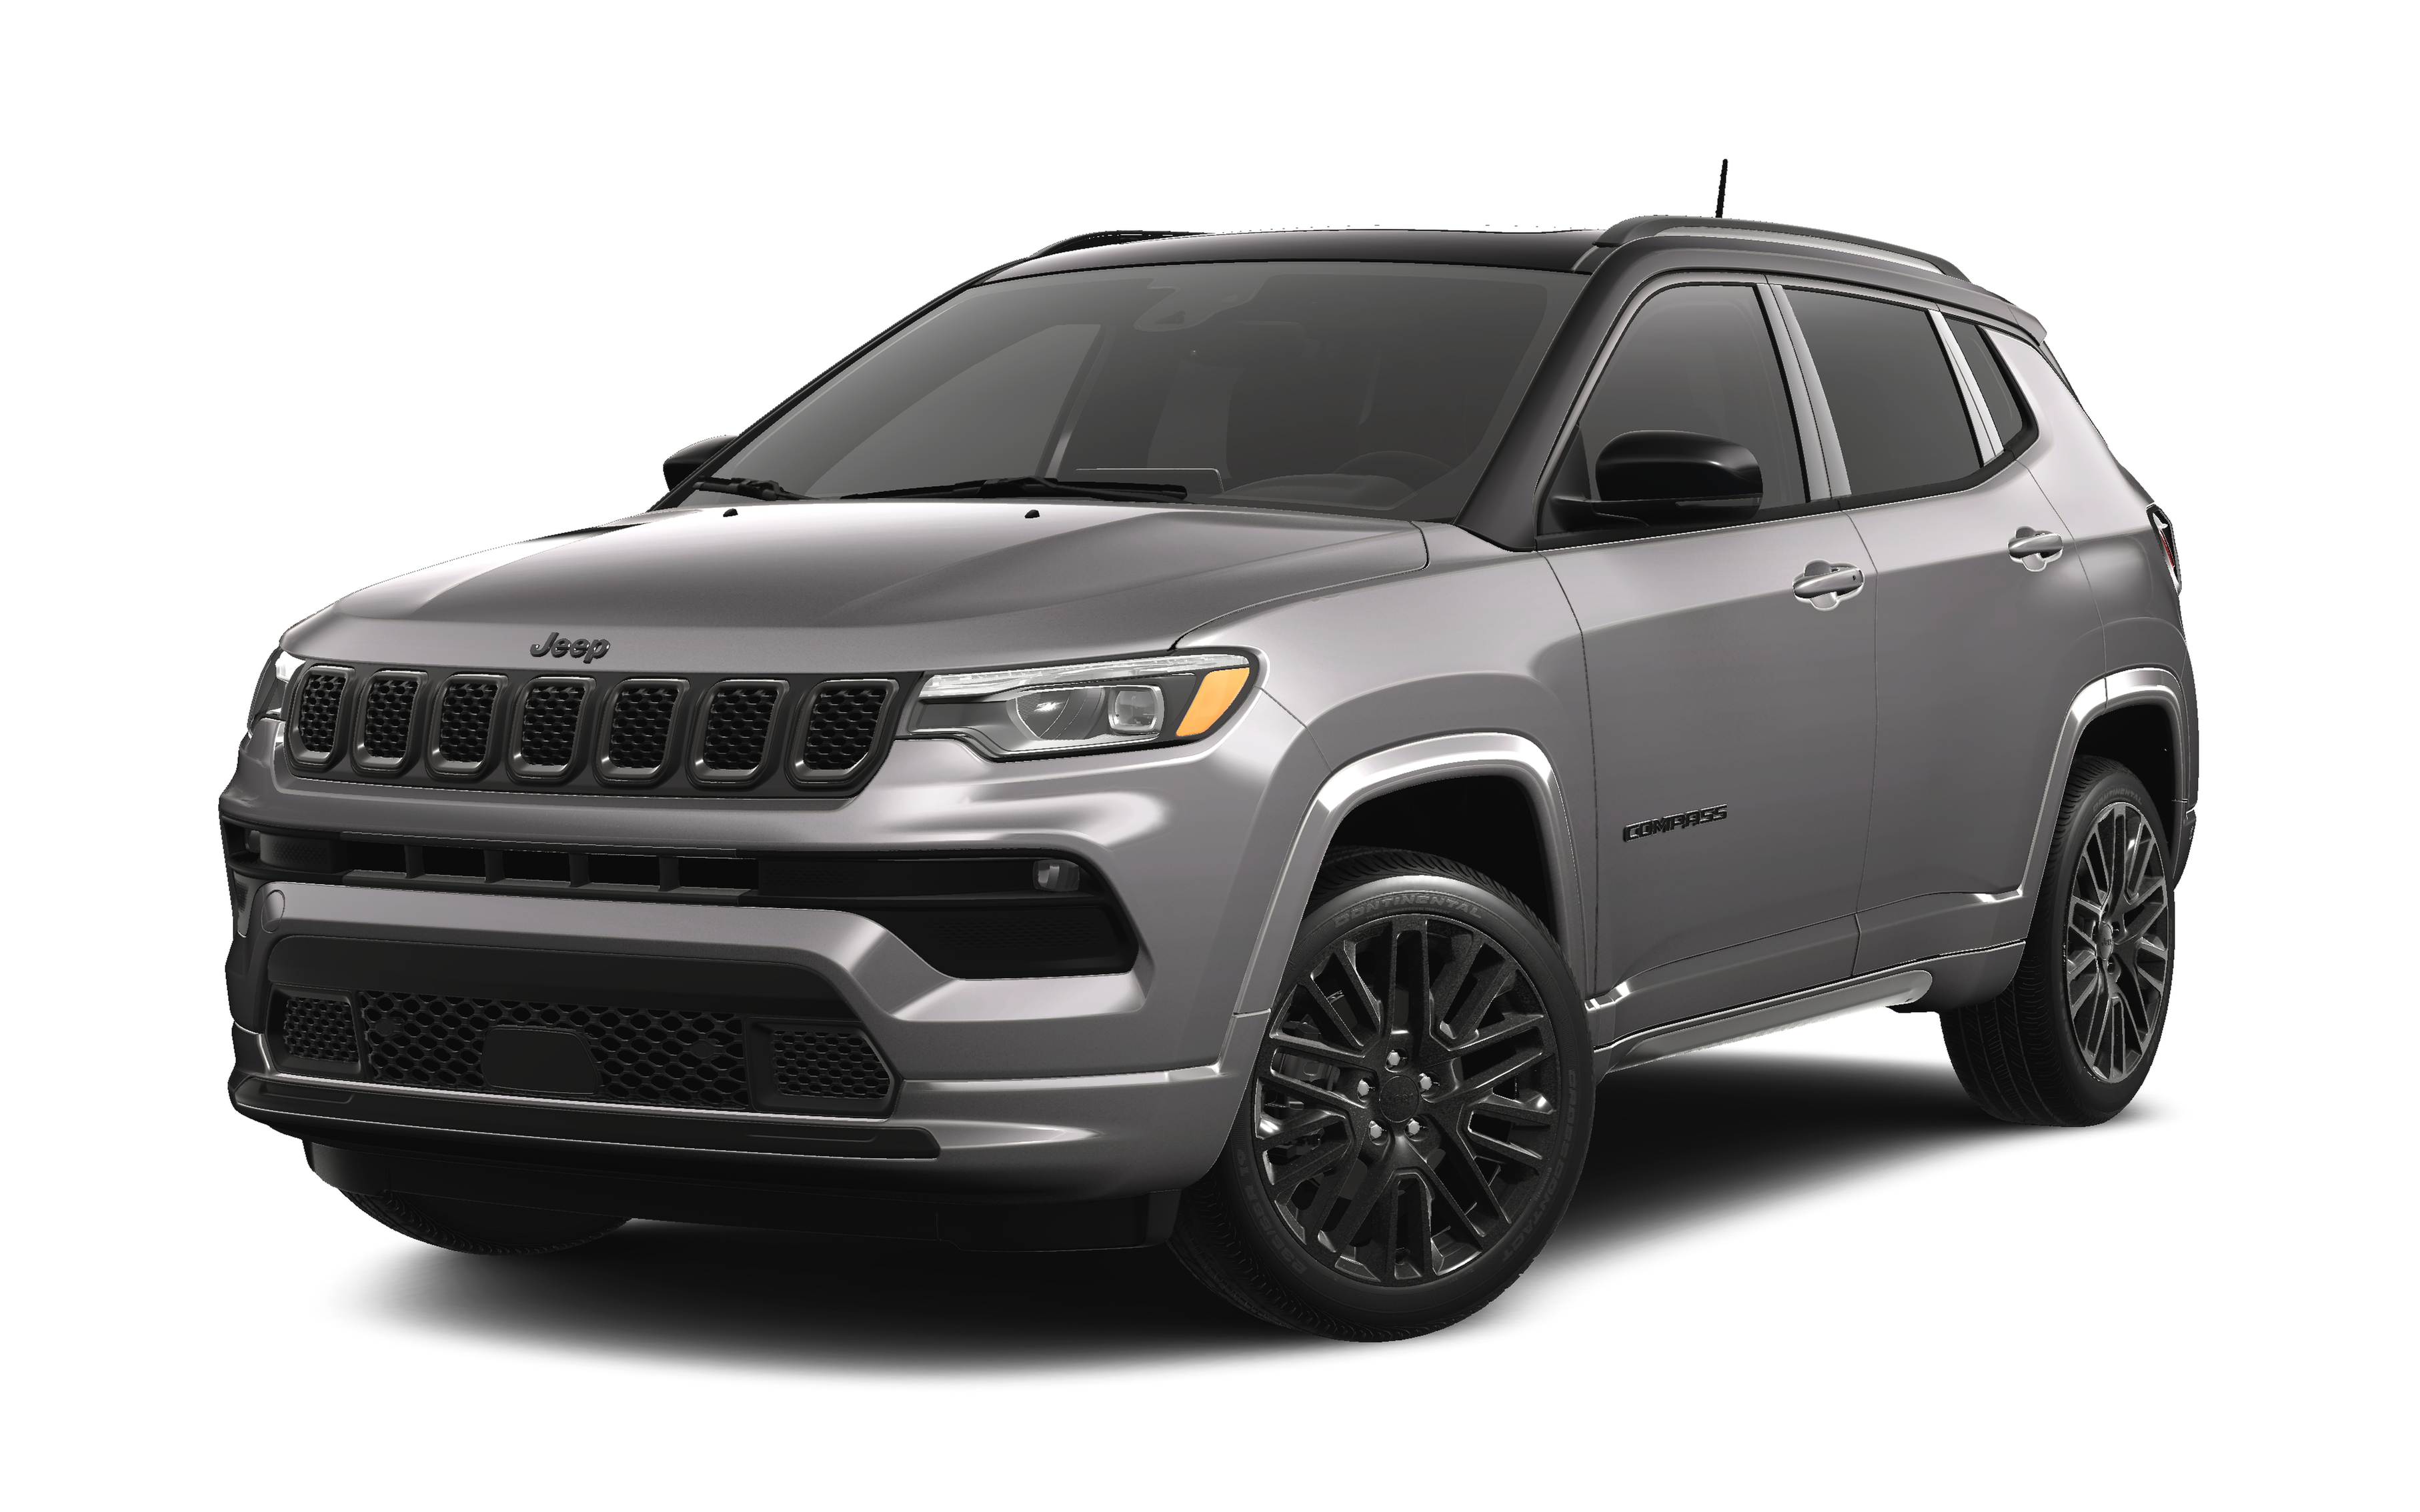 2019 Jeep Compass Info | Jeep Compass Pictures & Specs | Executive Jeep